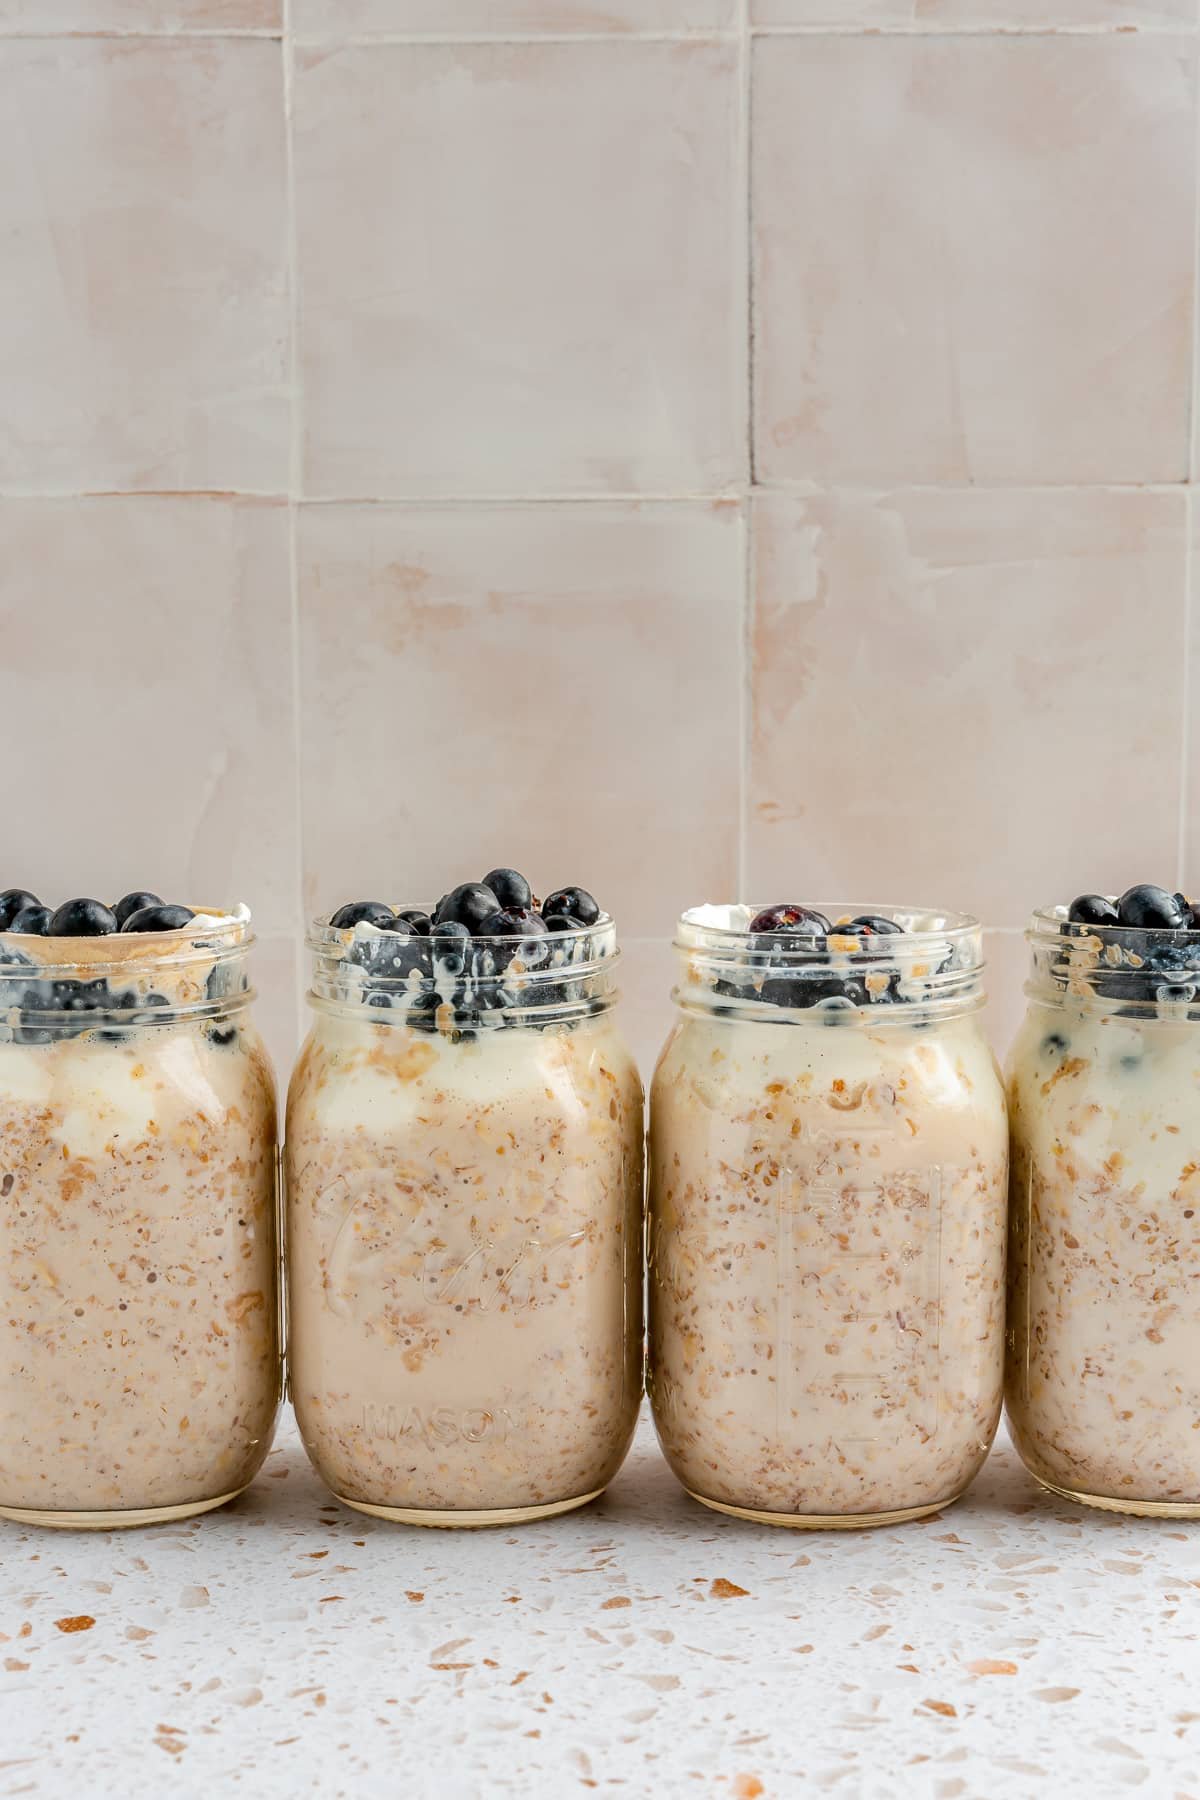 4 mason jars, full of high protein overnight oats, have been topped with blueberries. They sit arranged in a line on a white speckled countertop.